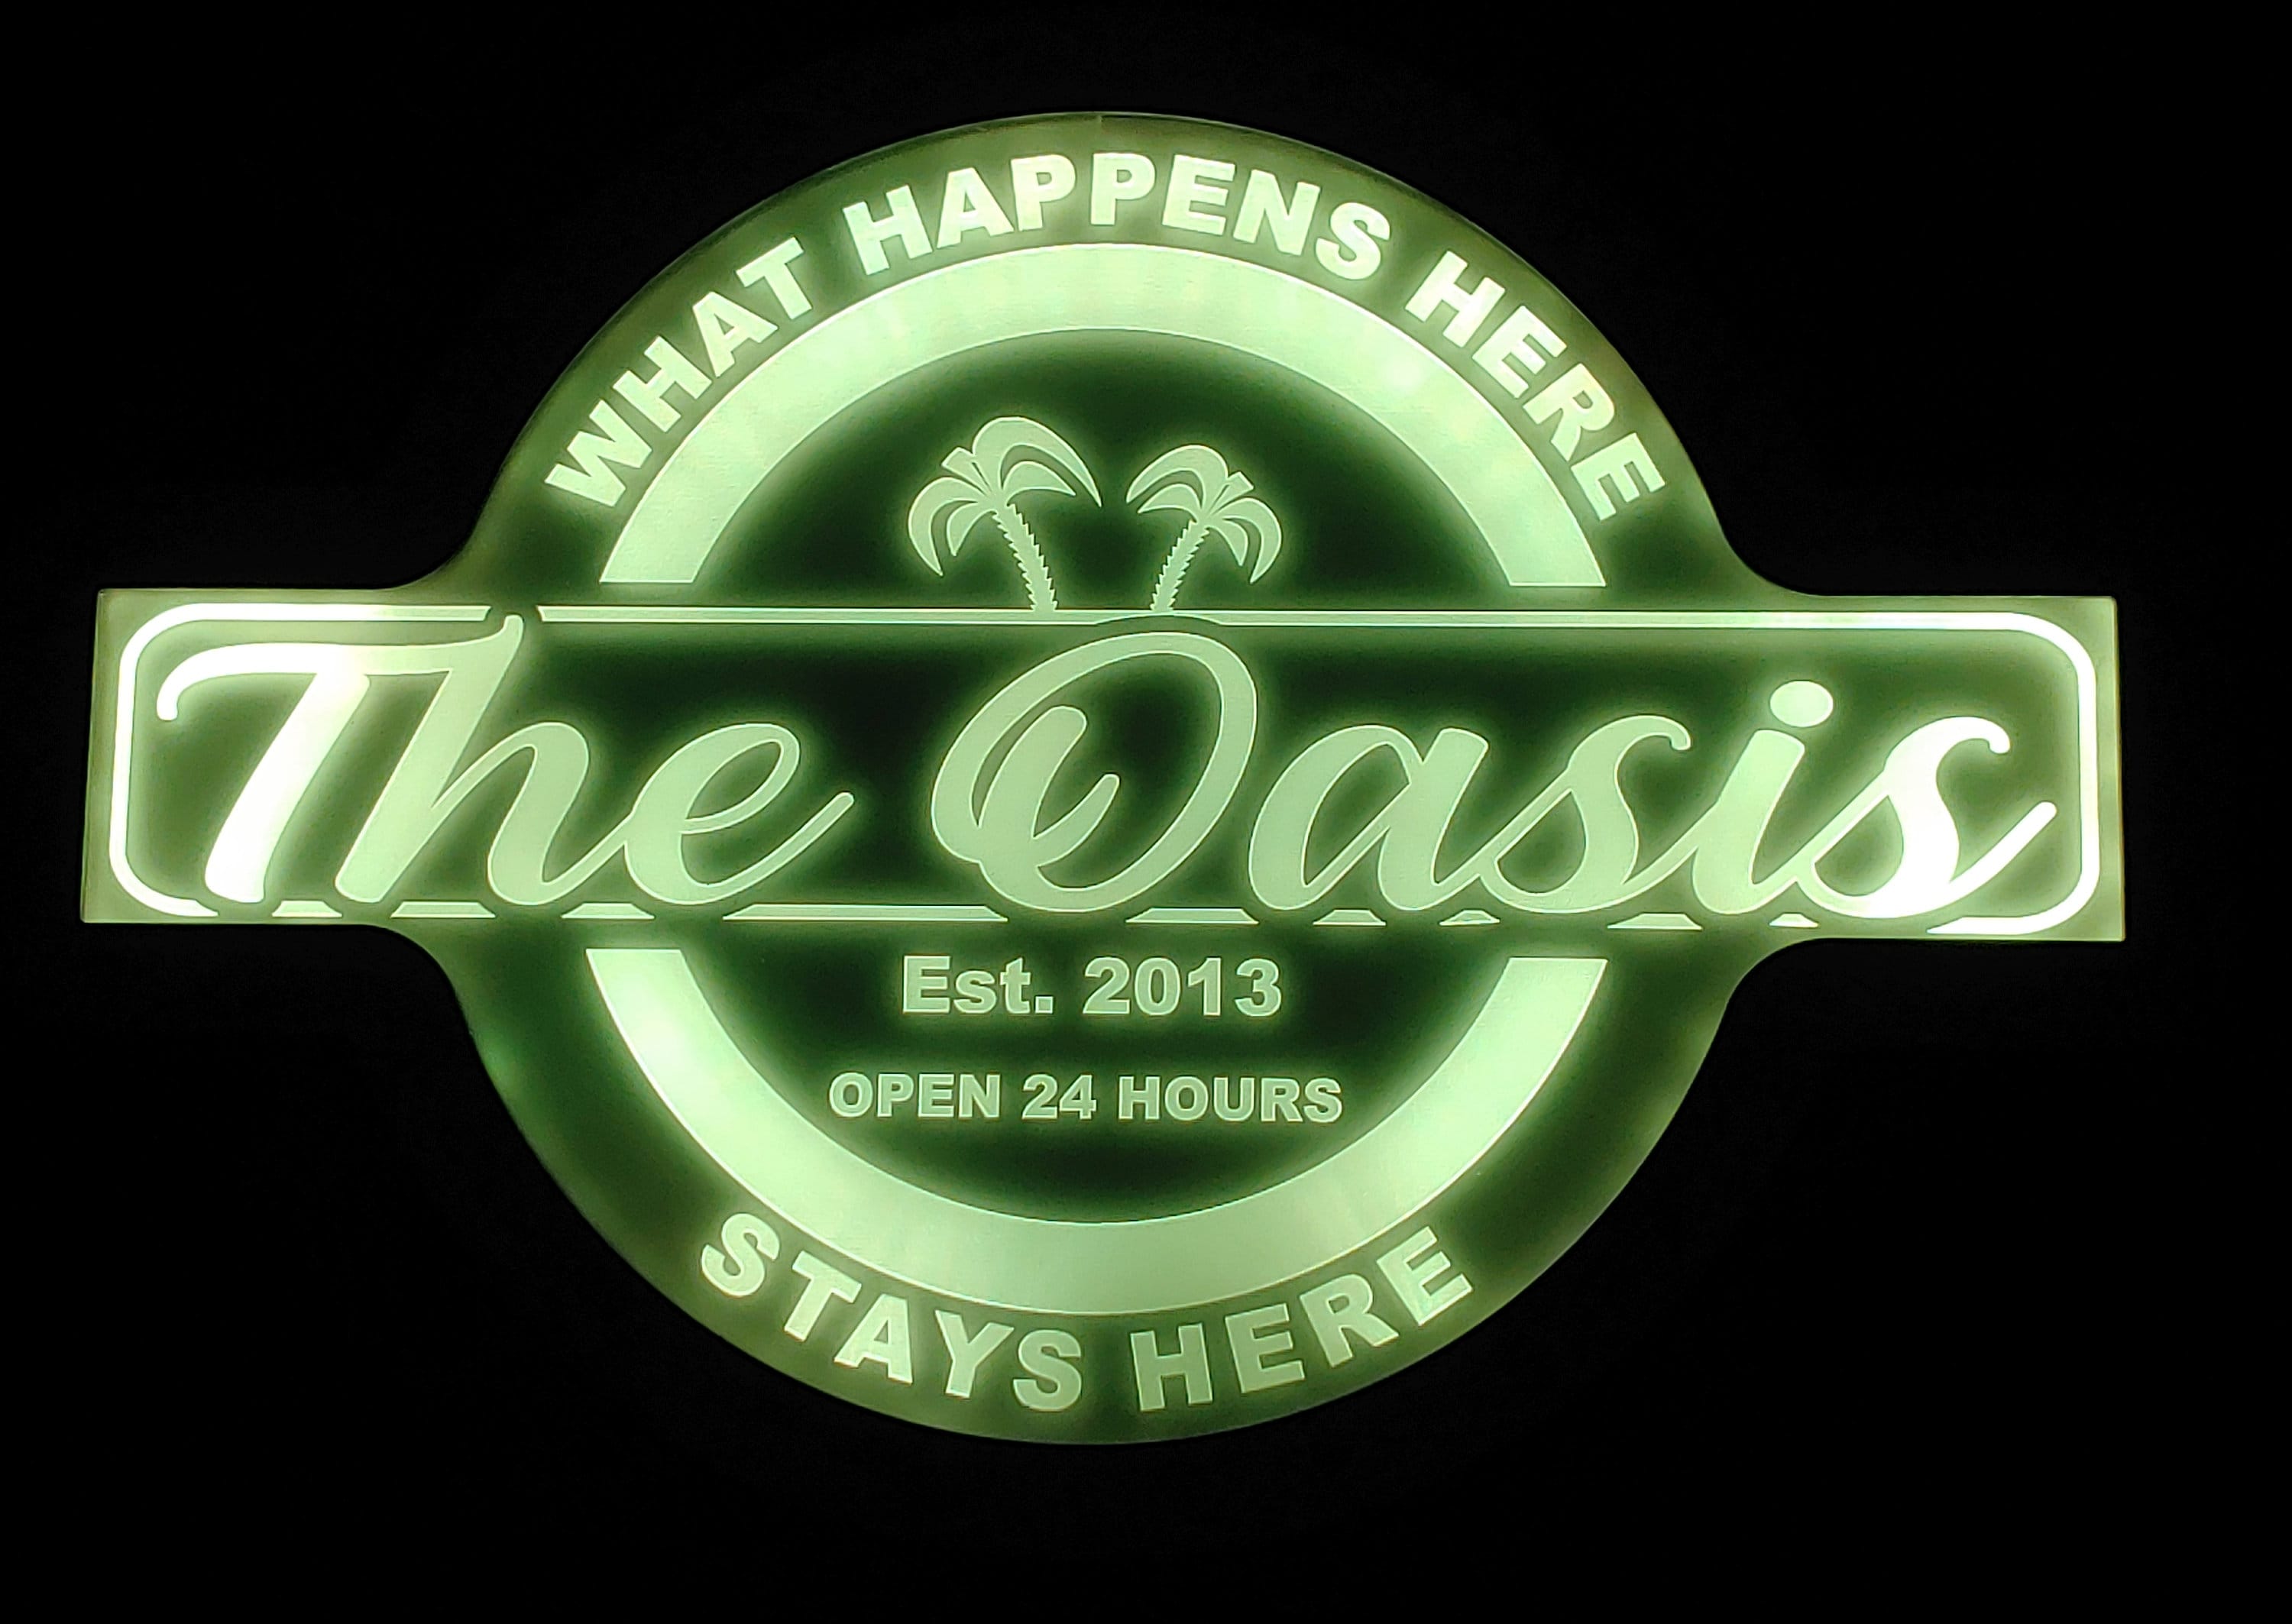 Custom Oasis Lounge or Bar Led Wall Sign Neon Like - Color Changing Remote Control - 4 Sizes Free Shipping